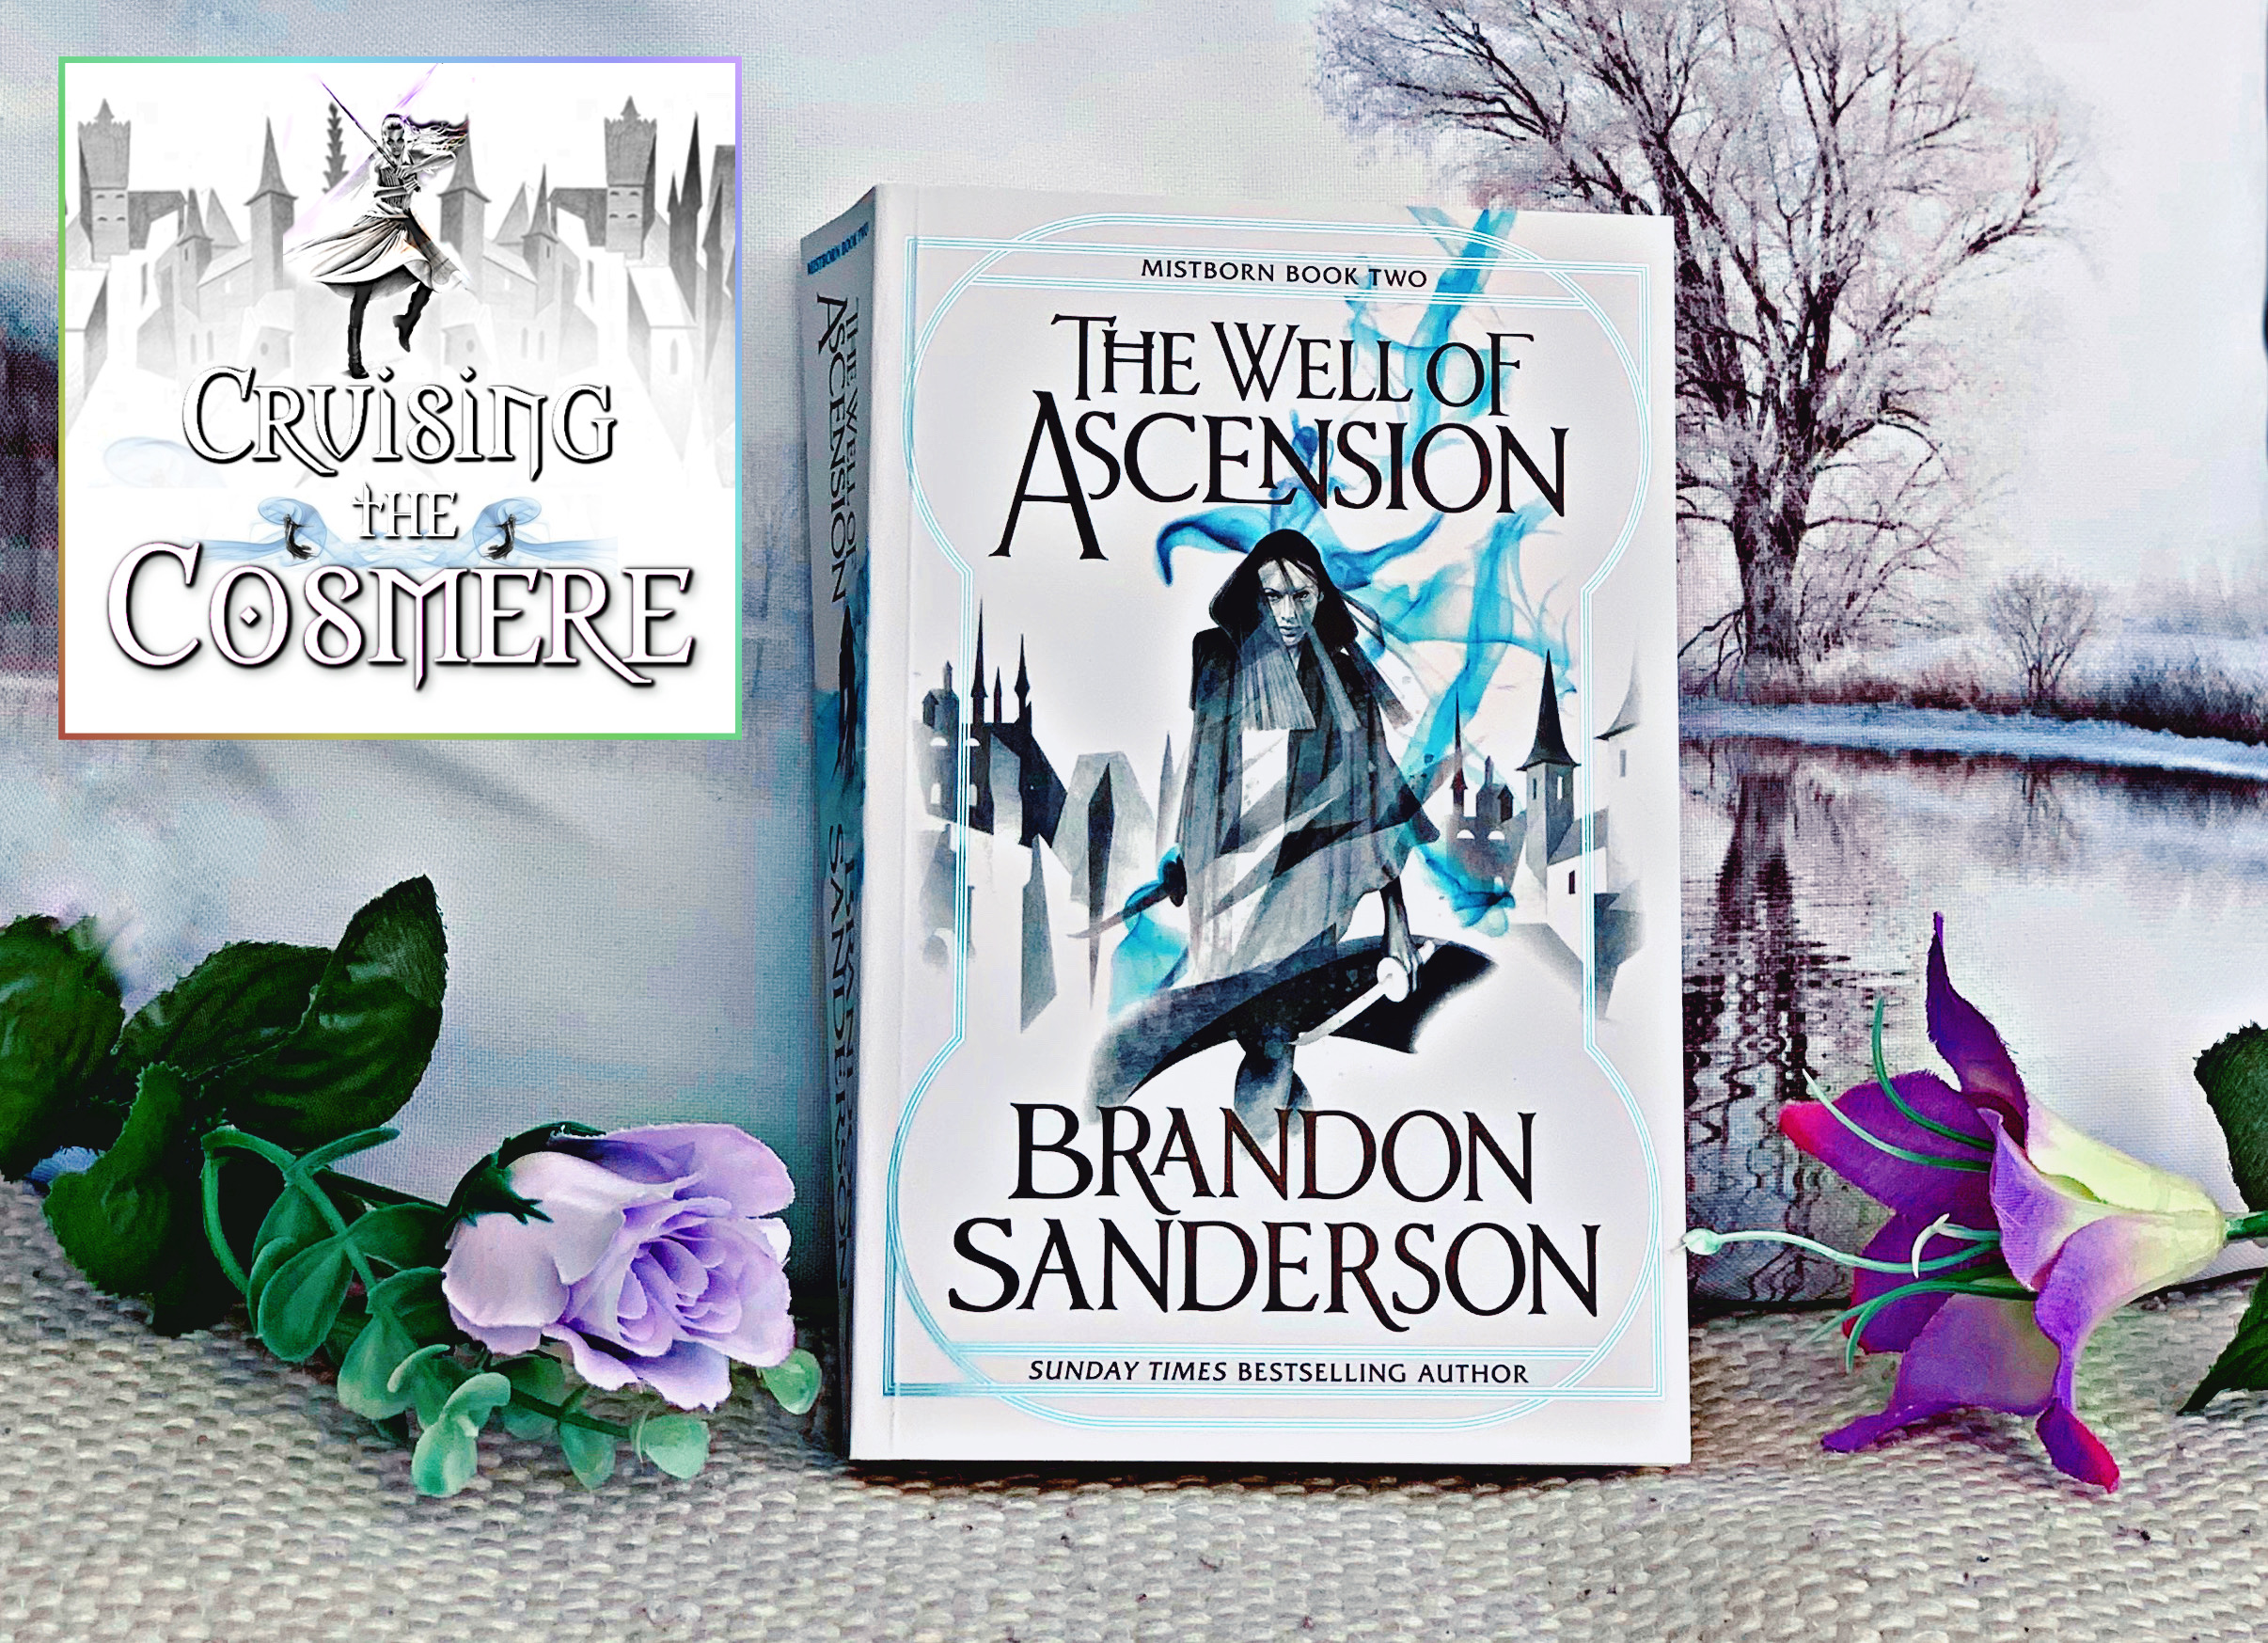 The Well of Ascension - (Mistborn Saga) by Brandon Sanderson (Paperback)